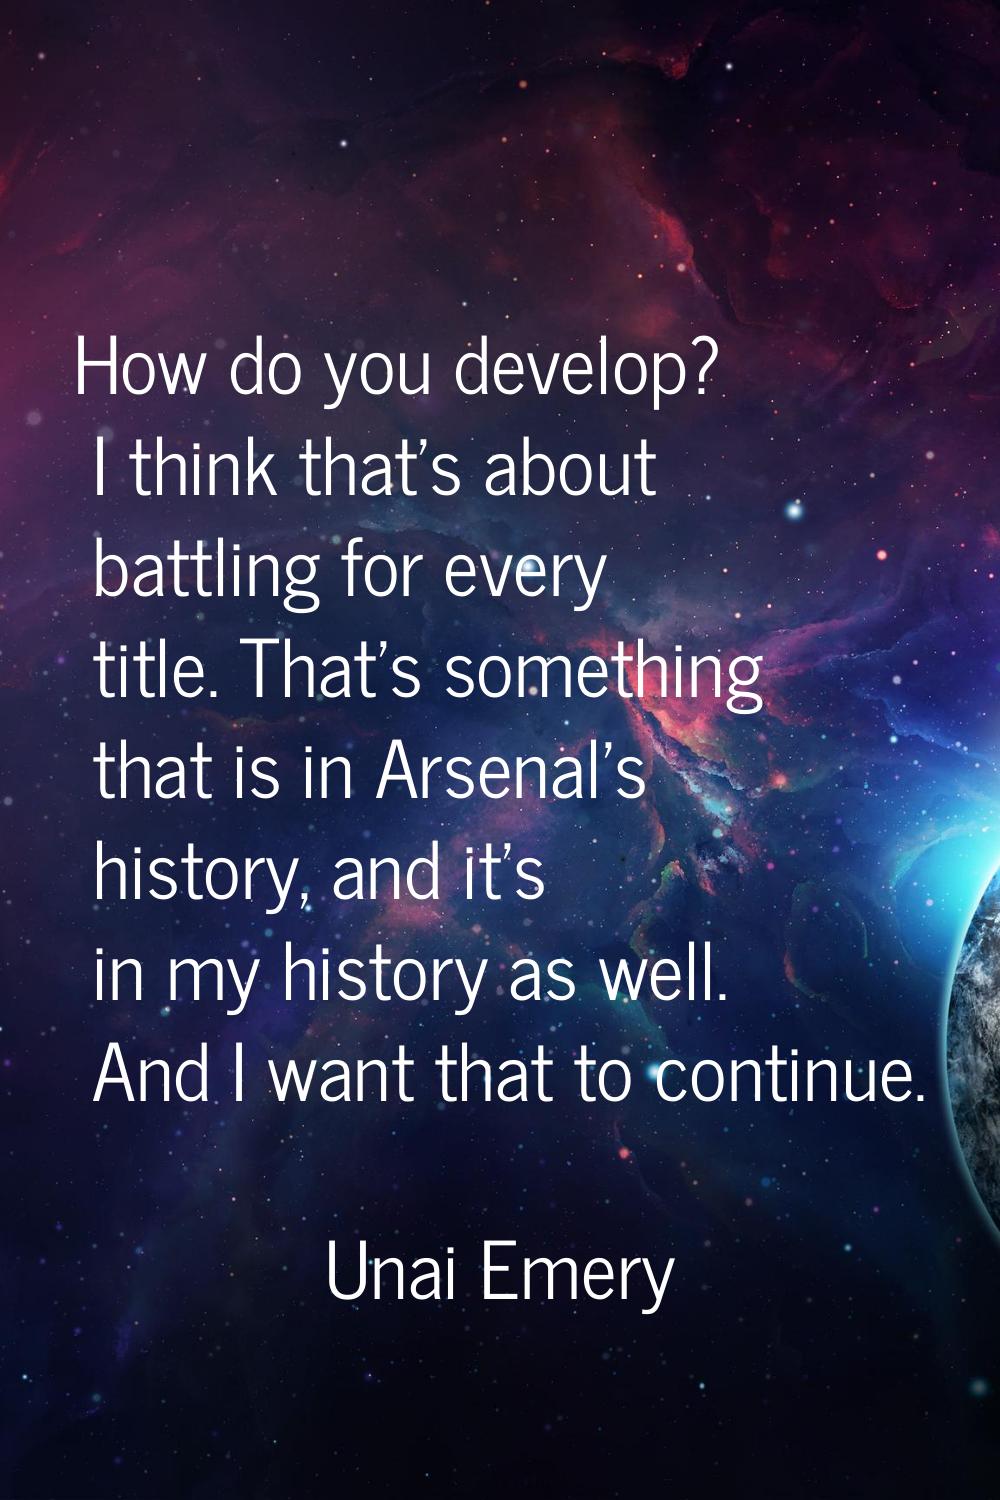 How do you develop? I think that's about battling for every title. That's something that is in Arse